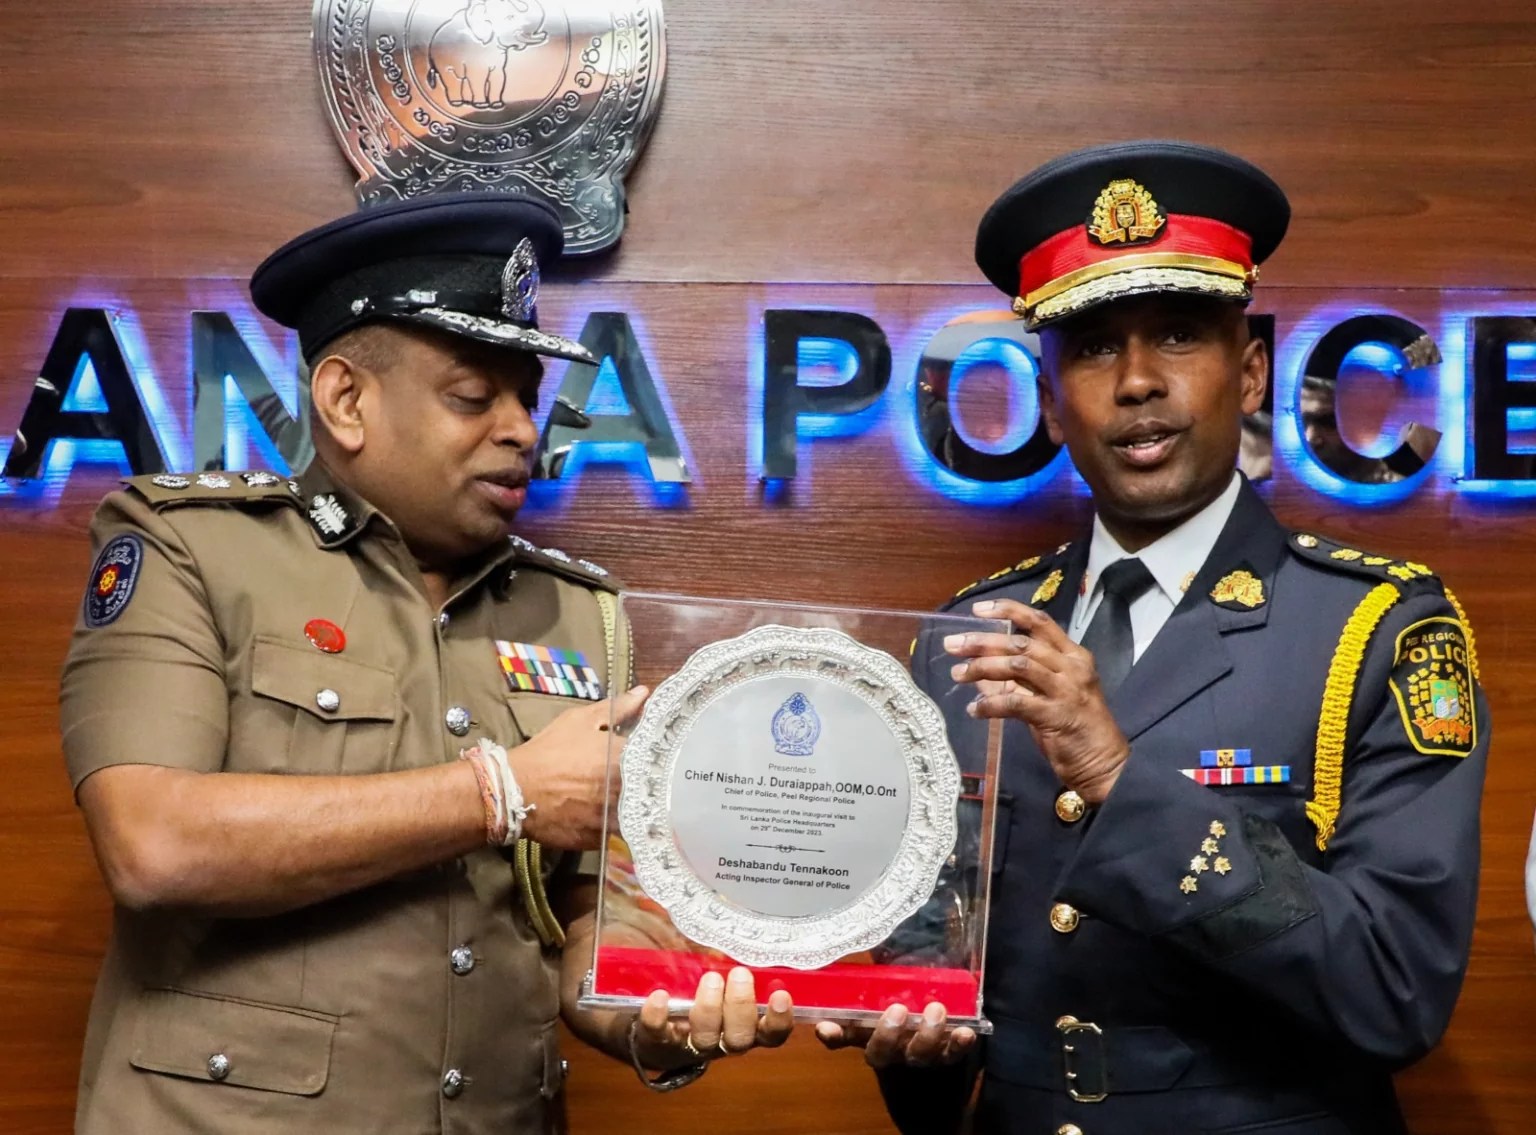 Calls grow for apology after Peel police chief meets Sri Lankan ‘torturer’